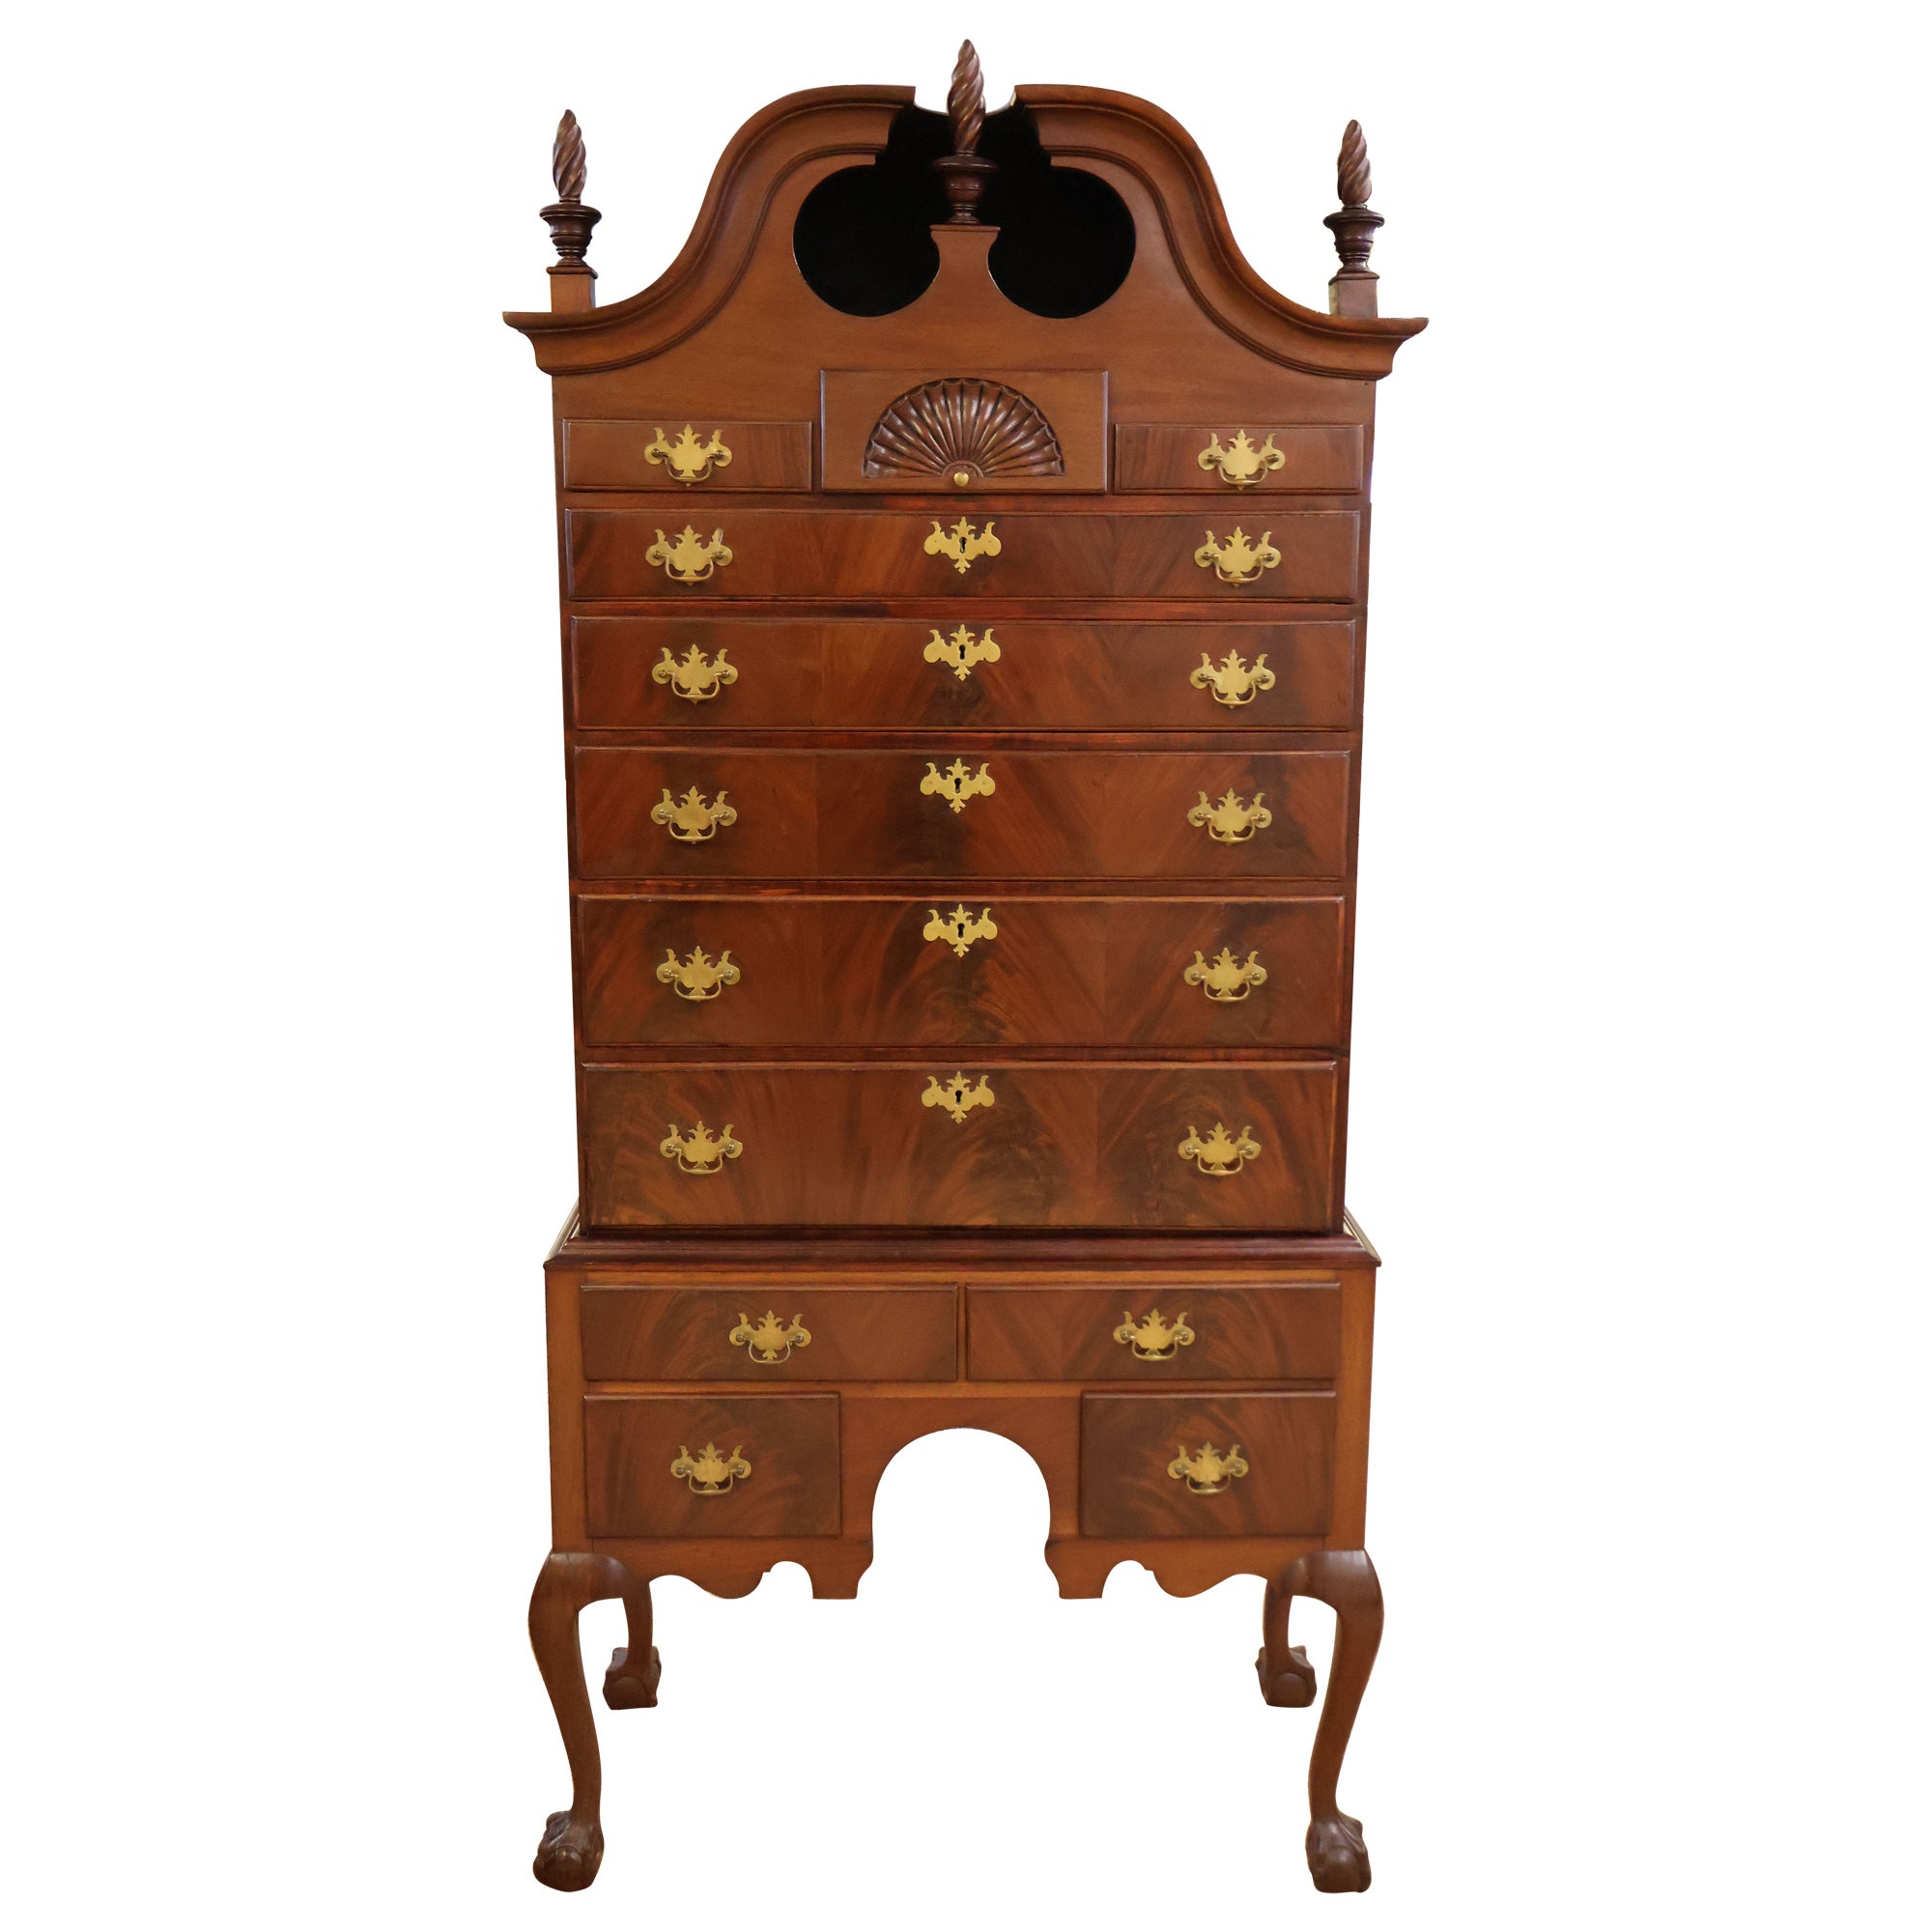 19th Century American Mahogany Chippendale Bonnet Top High Chest Highboy For Sale